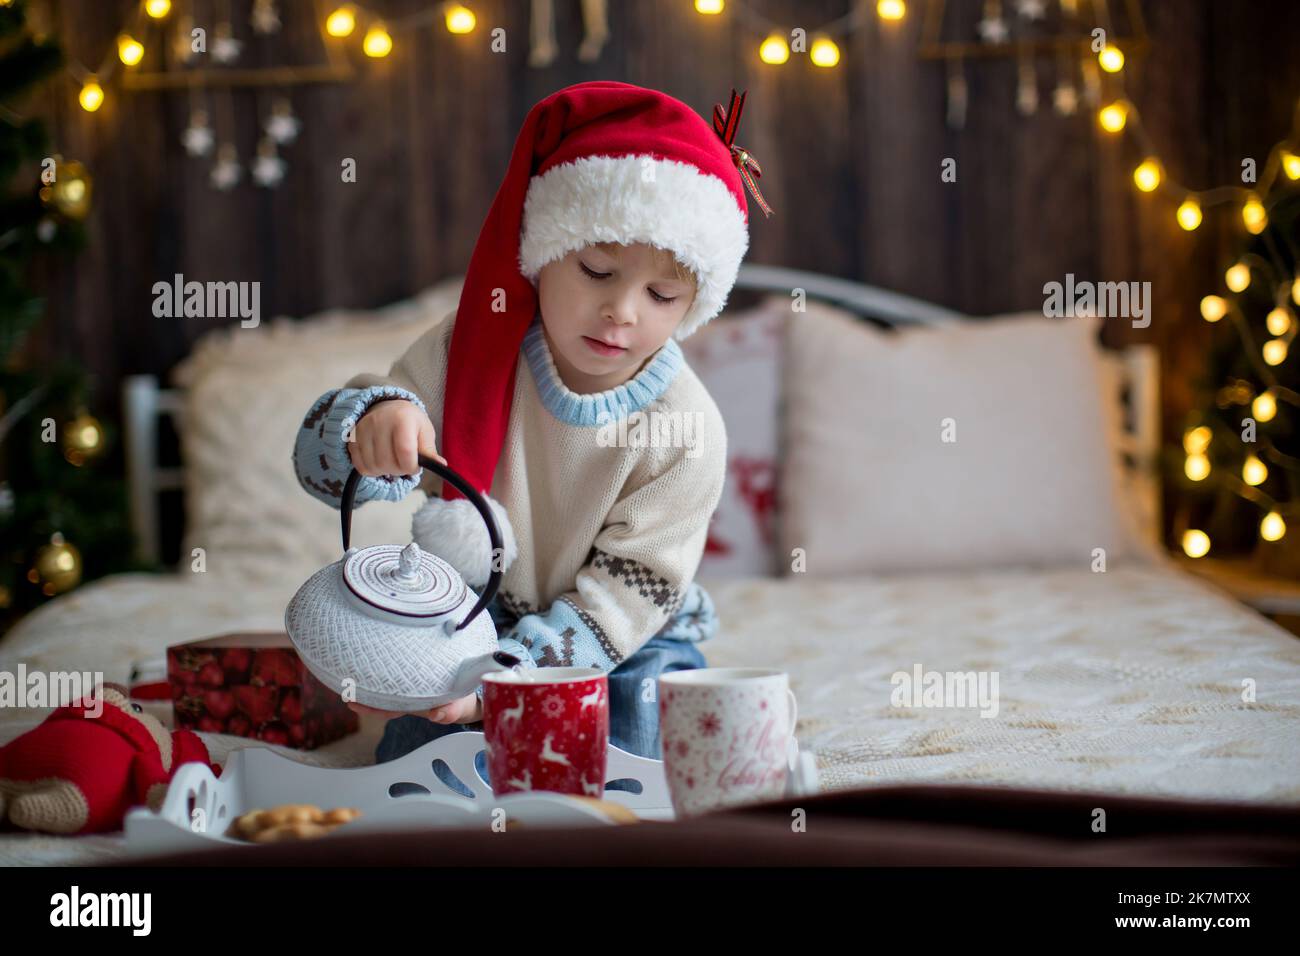 Cute toddler child, boy in a Christmas outfit, playing in a wooden cabin on Christmas, decoration around him. Child reading book and drinking tea Stock Photo